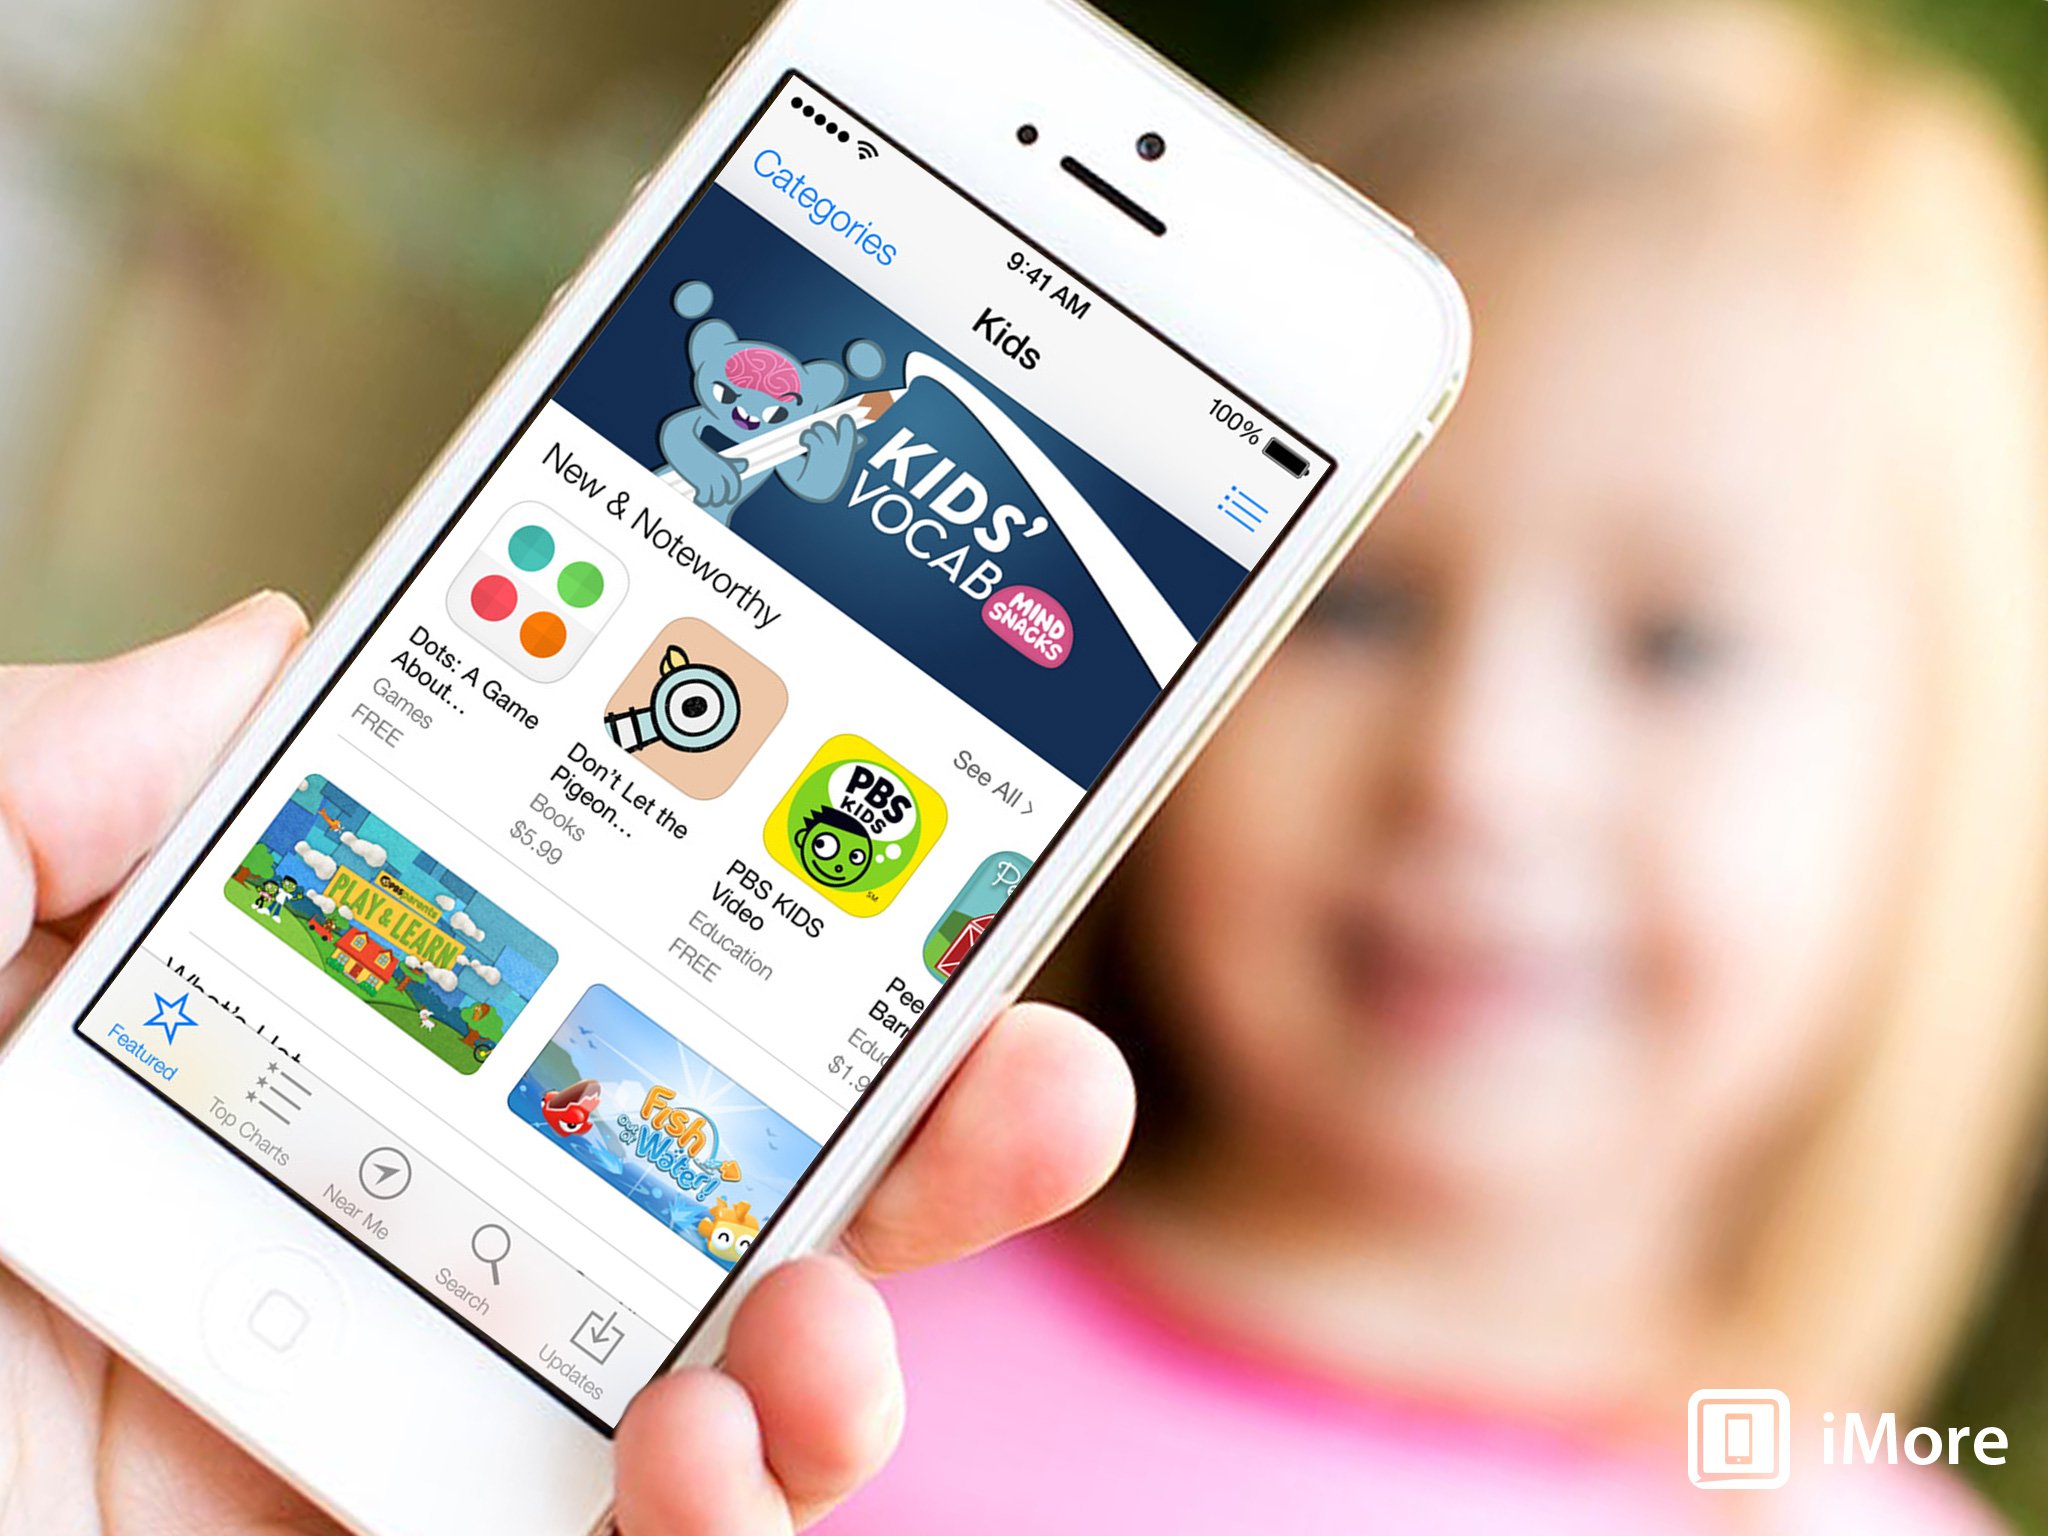 21 free apps for kids (without hidden in-app purchases!) - Care